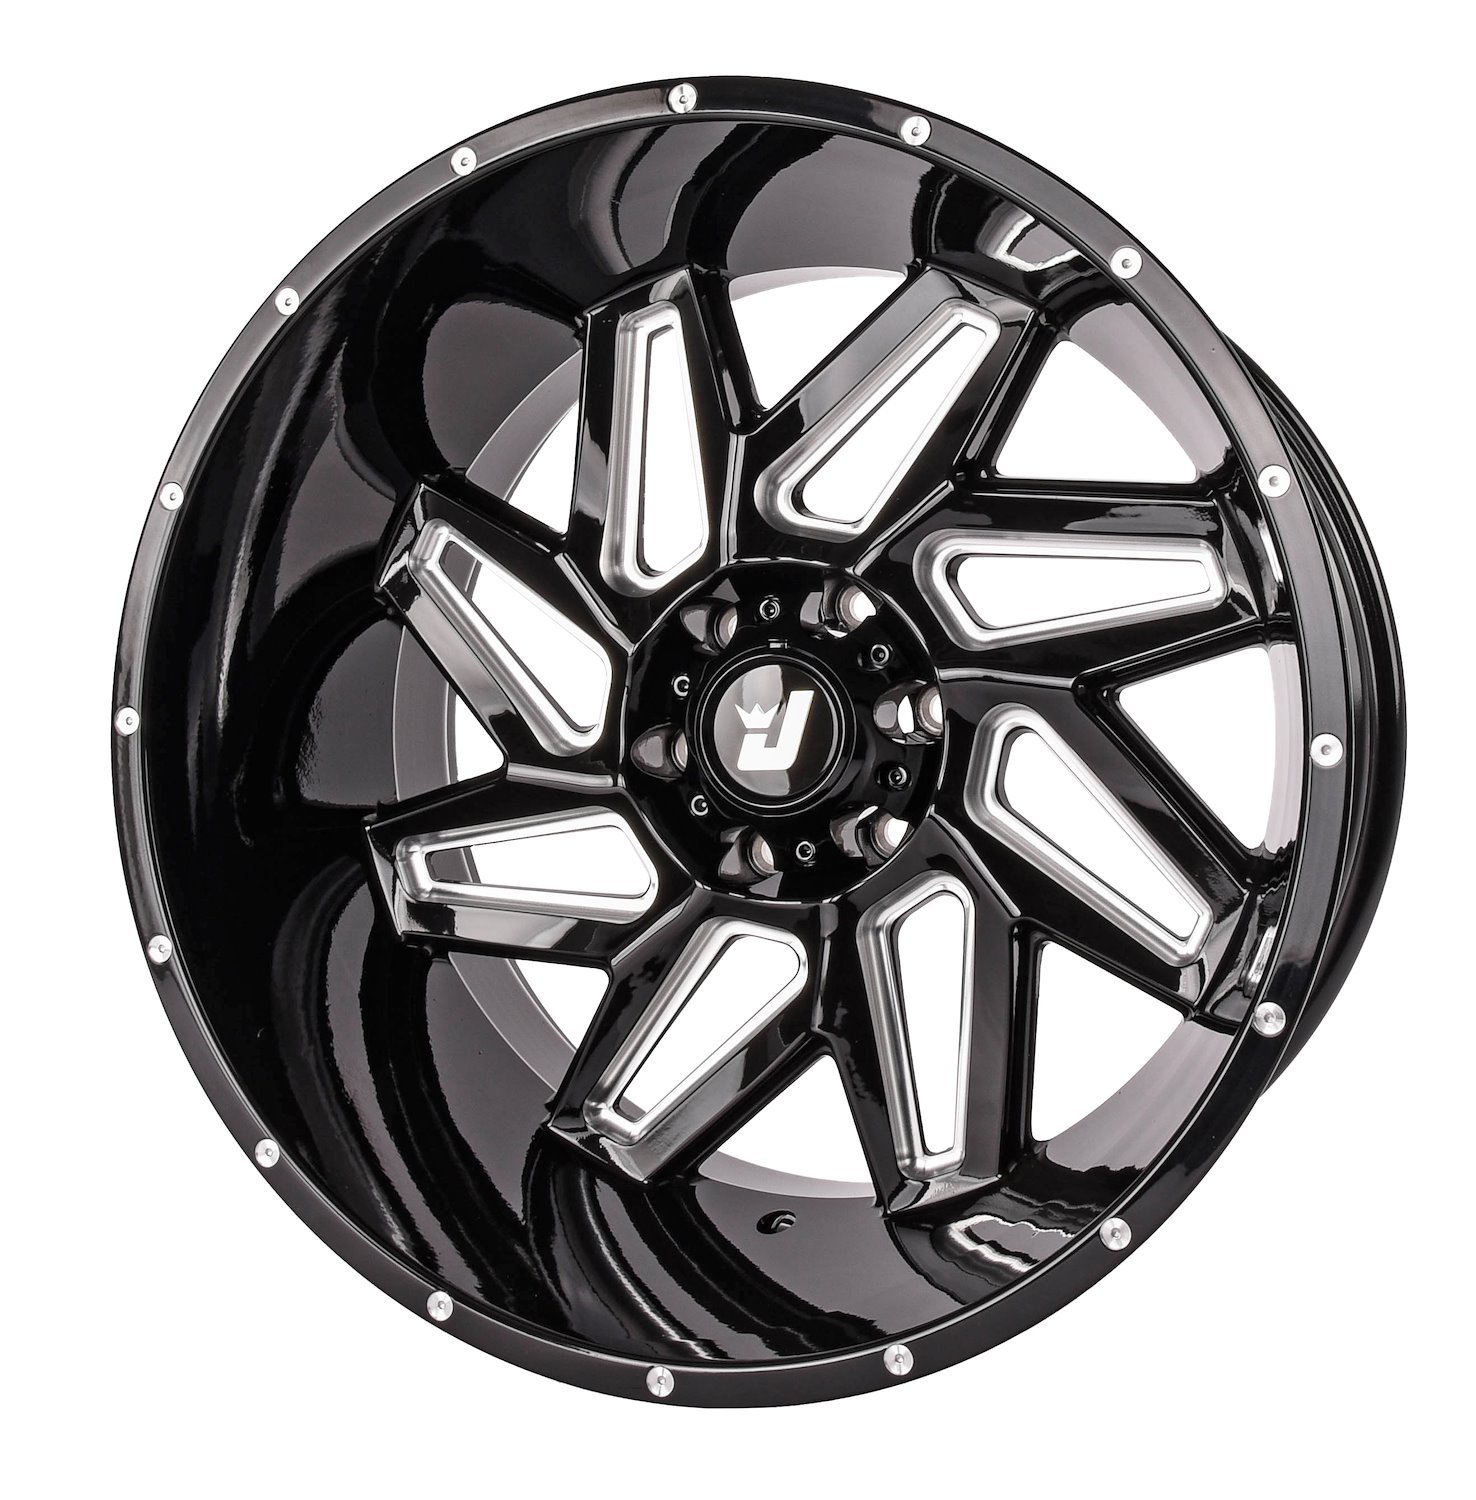 Catalyst Wheel [Size: 22" x 14"] Gloss Black with Milled Spokes